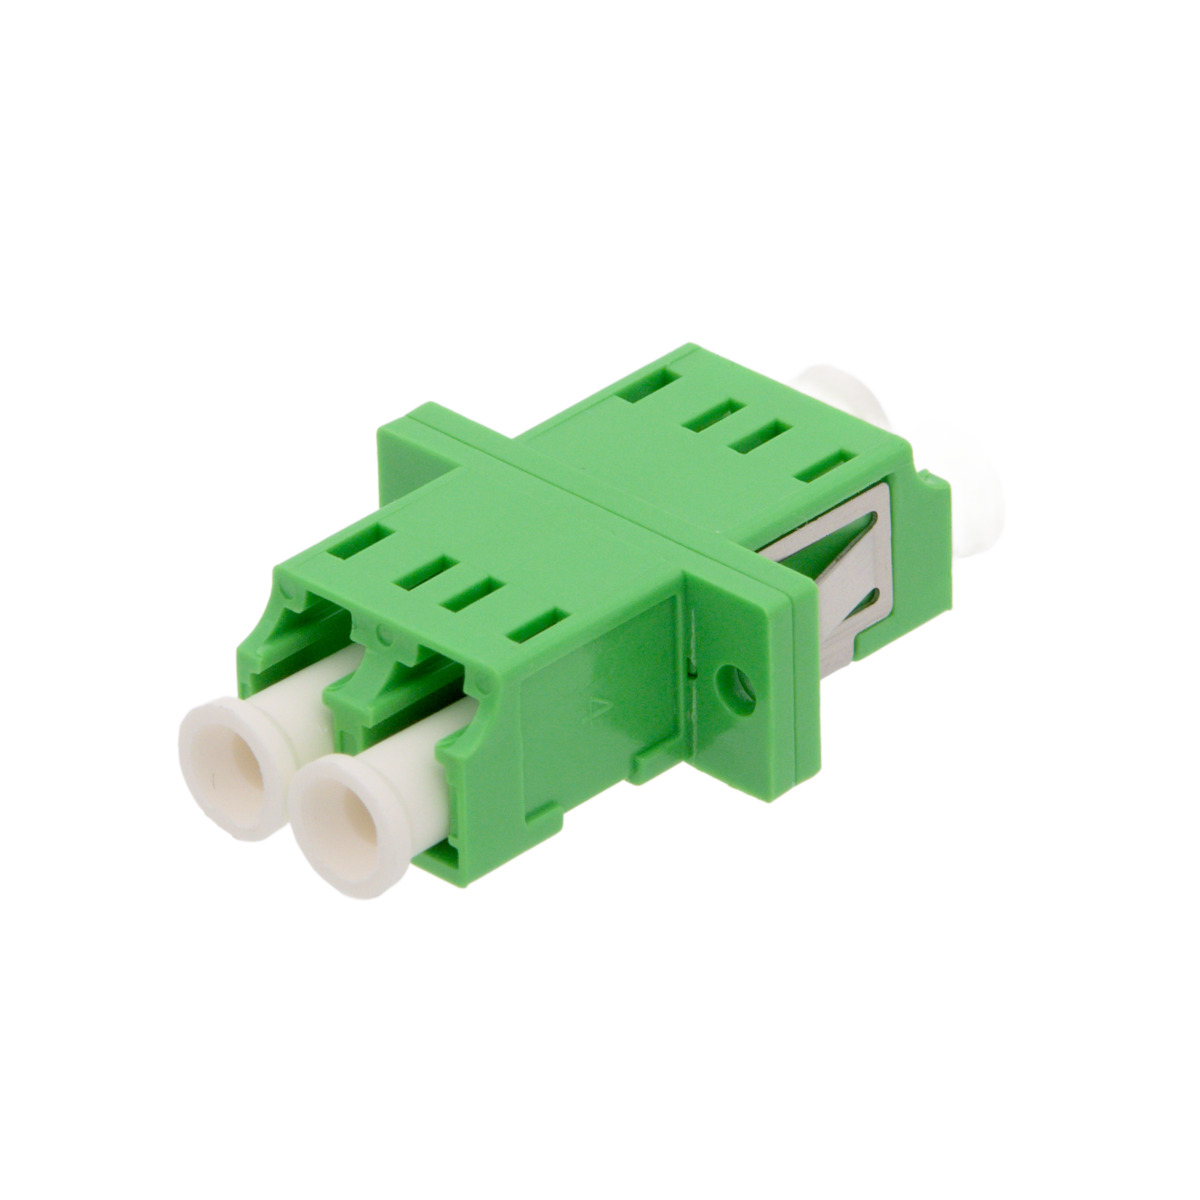 LC/APC SM DX Adapter Duplex with Flange for patch panel